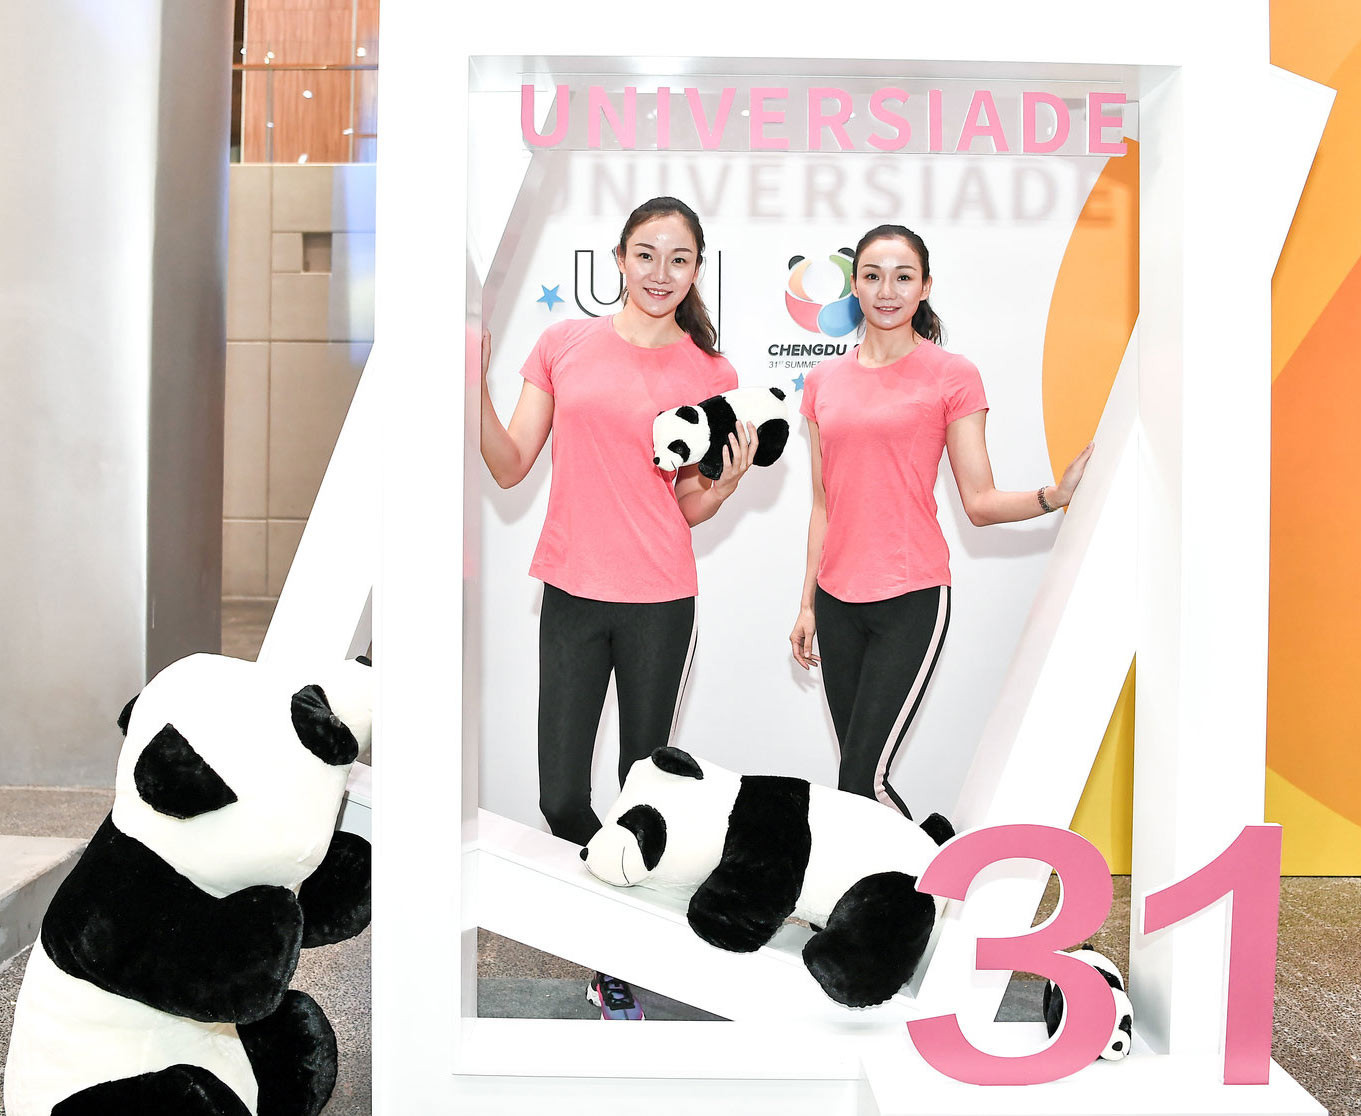 Chengdu is famous around the world for its pandas and they are set to feature heavily in its marketing campaign for the 2021 Summer Universiade launched in Beijing ©FISU